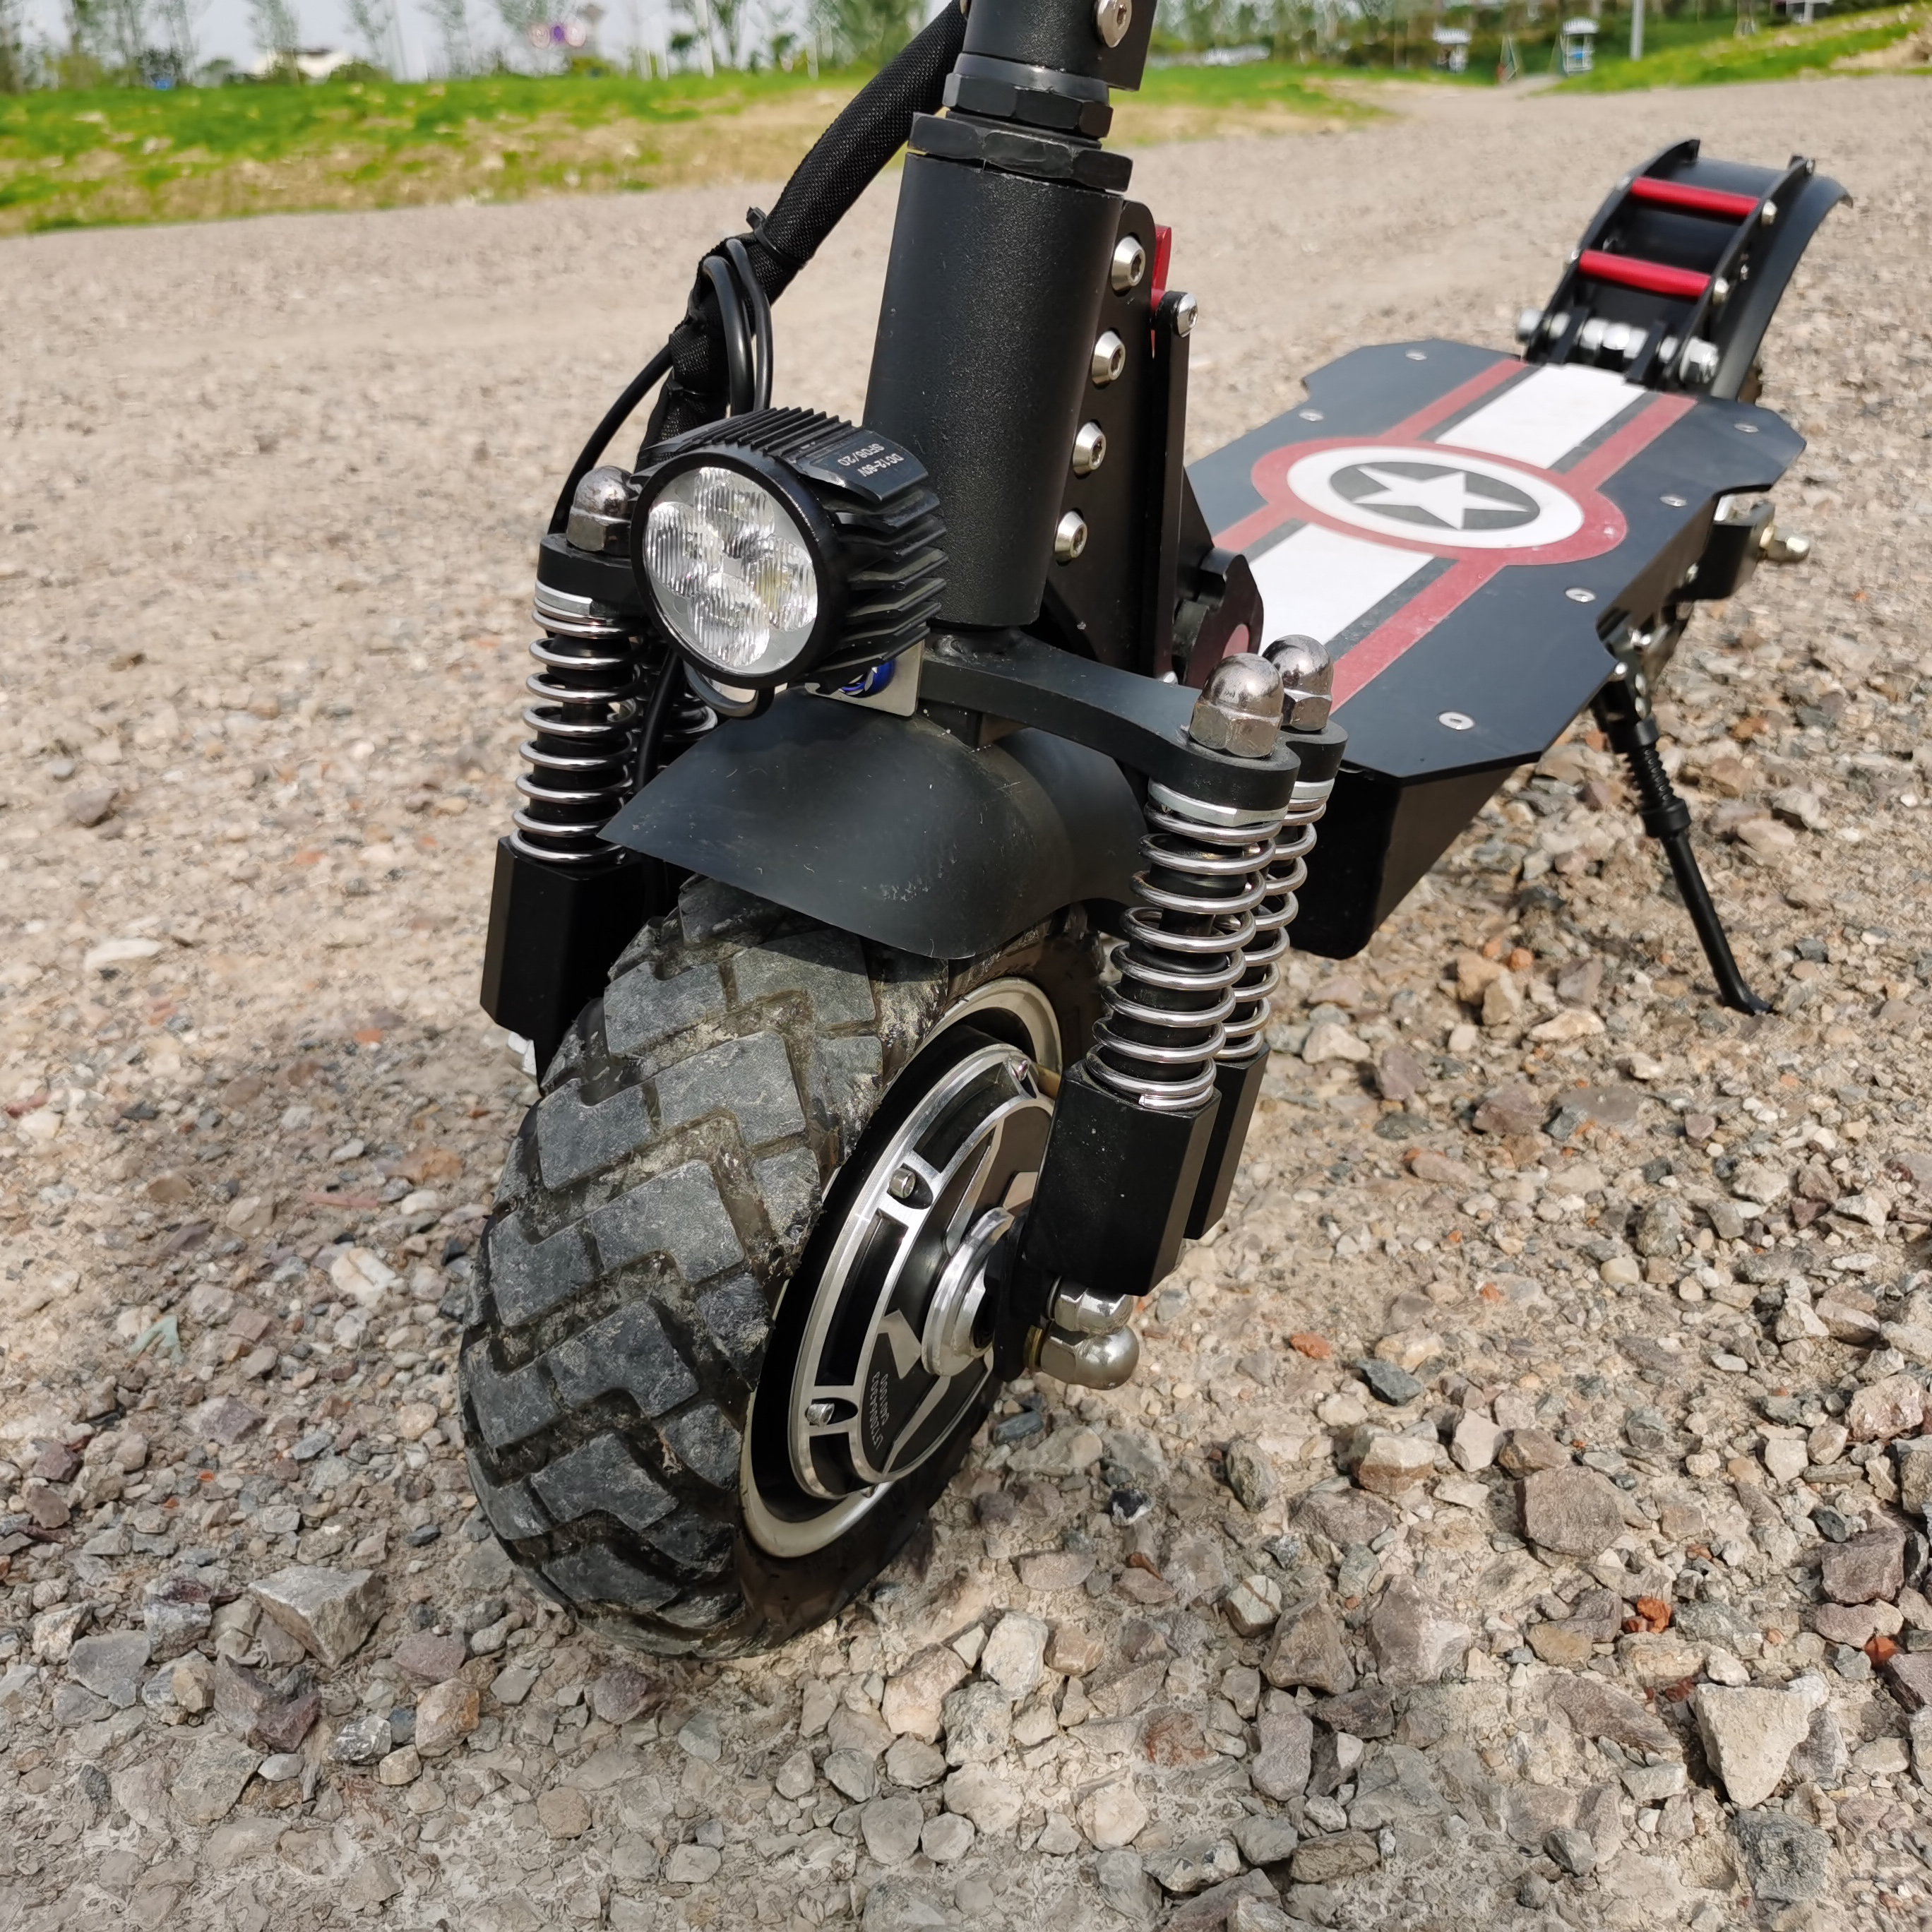 CF-D10-2B 48V 1600-2000W 15.6AH Stylish Cross Country E-scooter Dual Motors Off Road Folding Electric Scooter 